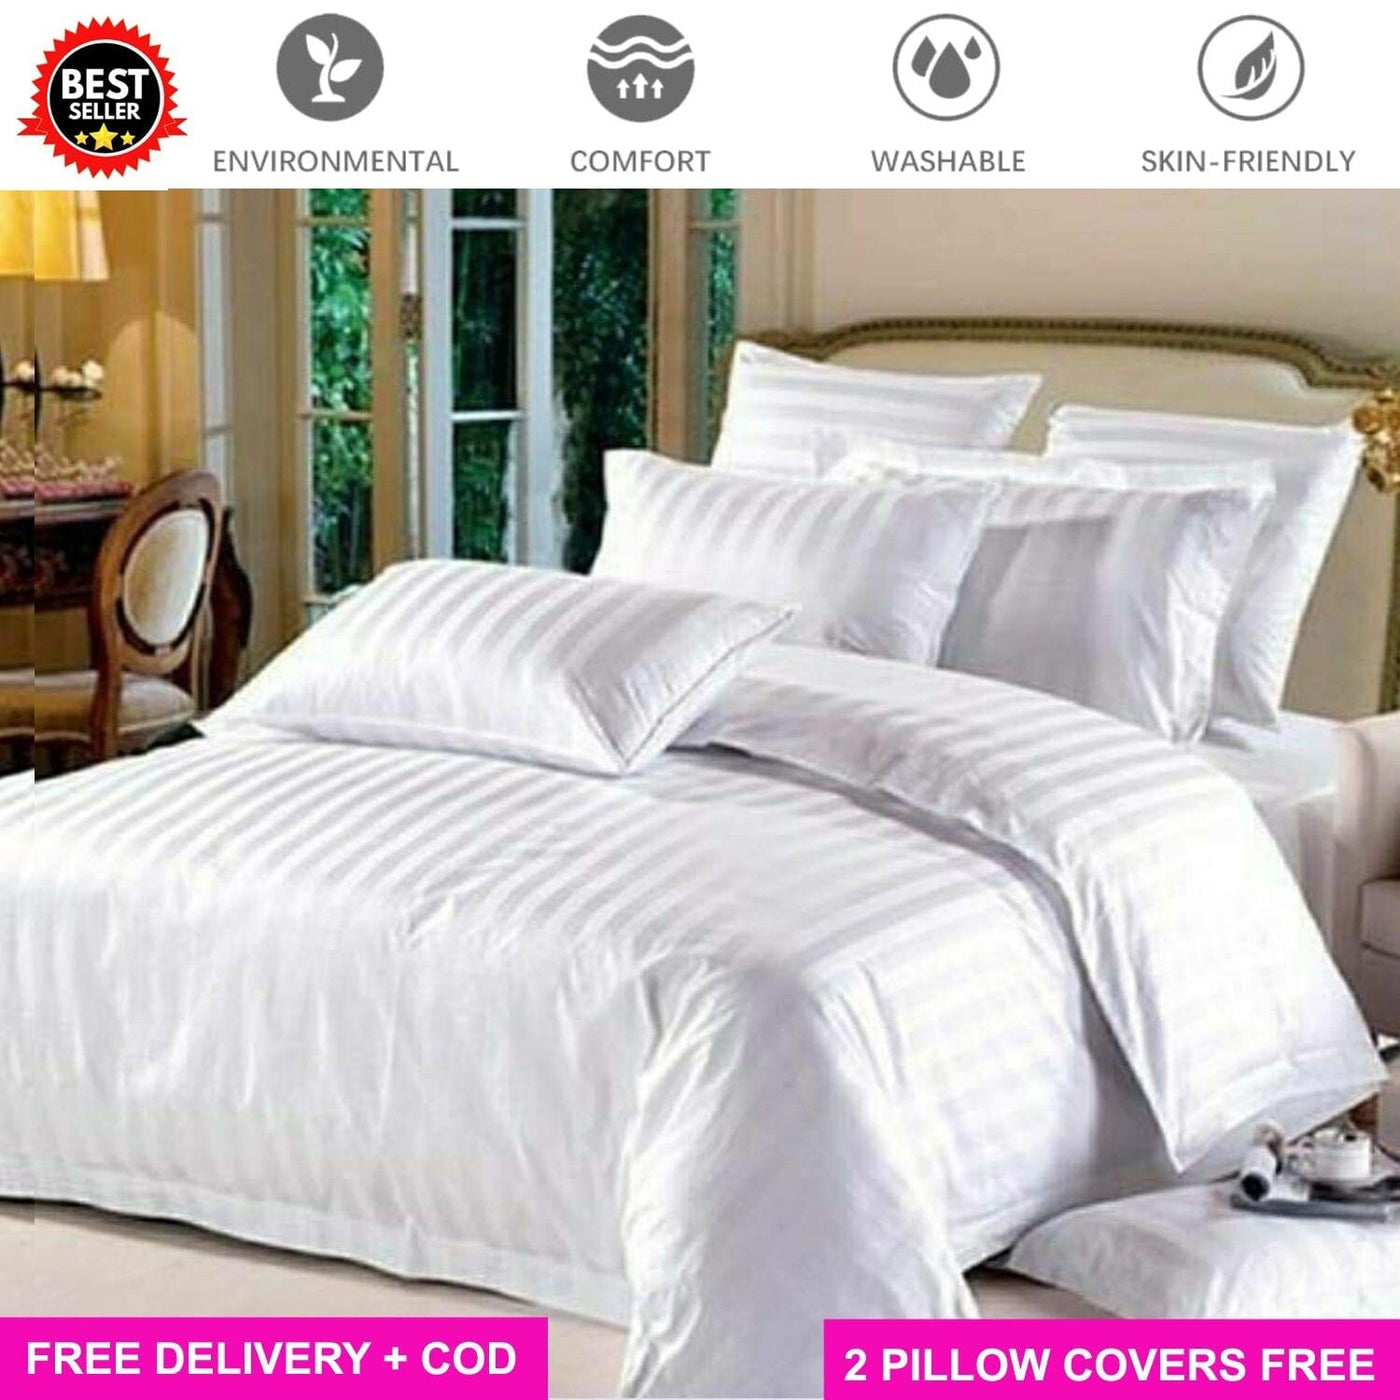 Satin White Full Elastic Fitted Bedsheet with 2 Pillow Covers Bed Sheets Great Happy IN KING SIZE - ₹1299 